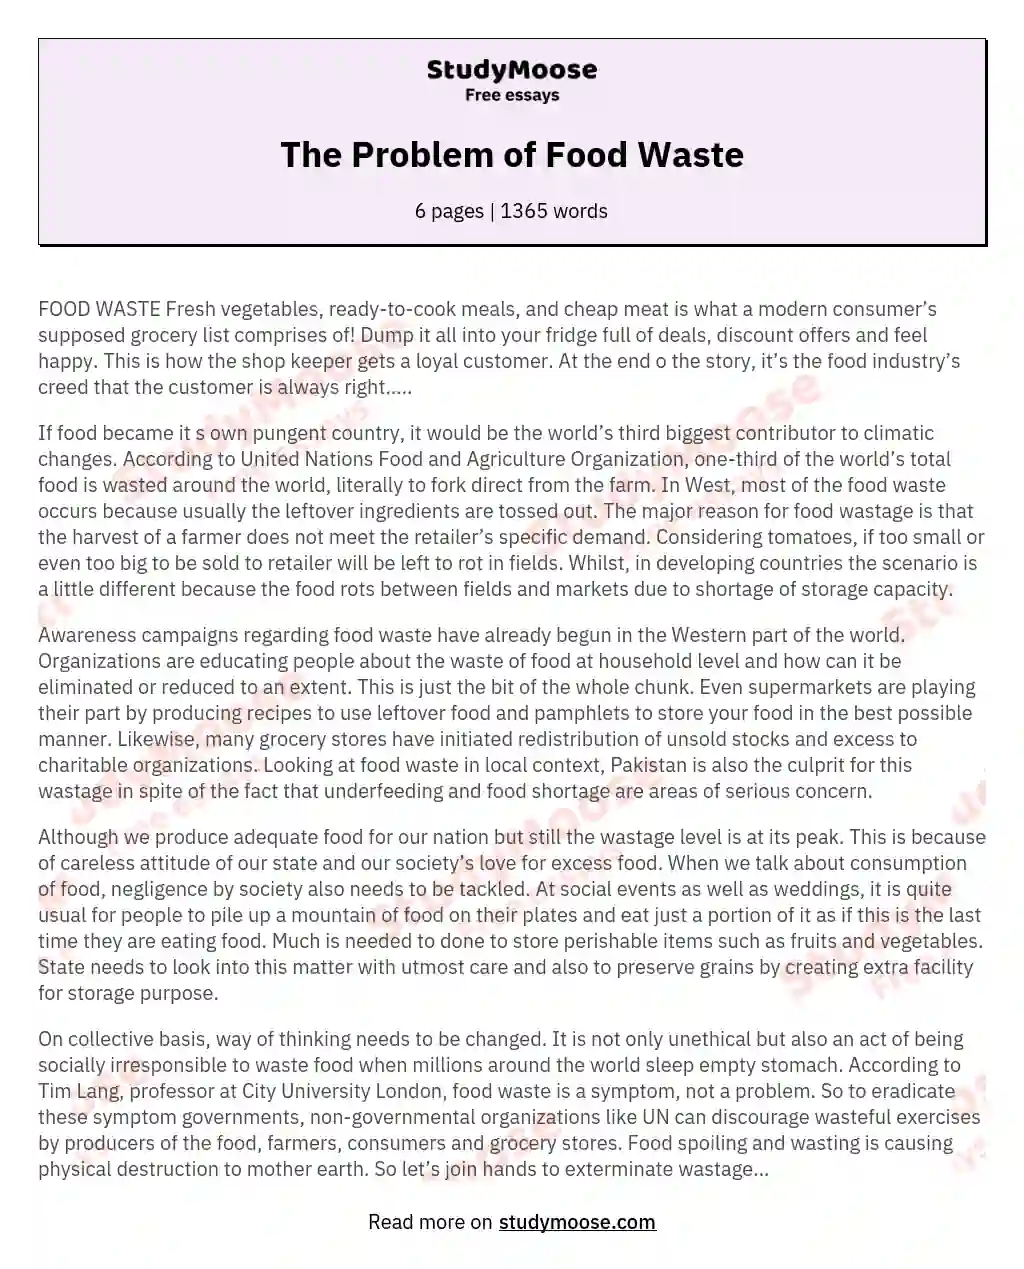 The Problem of Food Waste